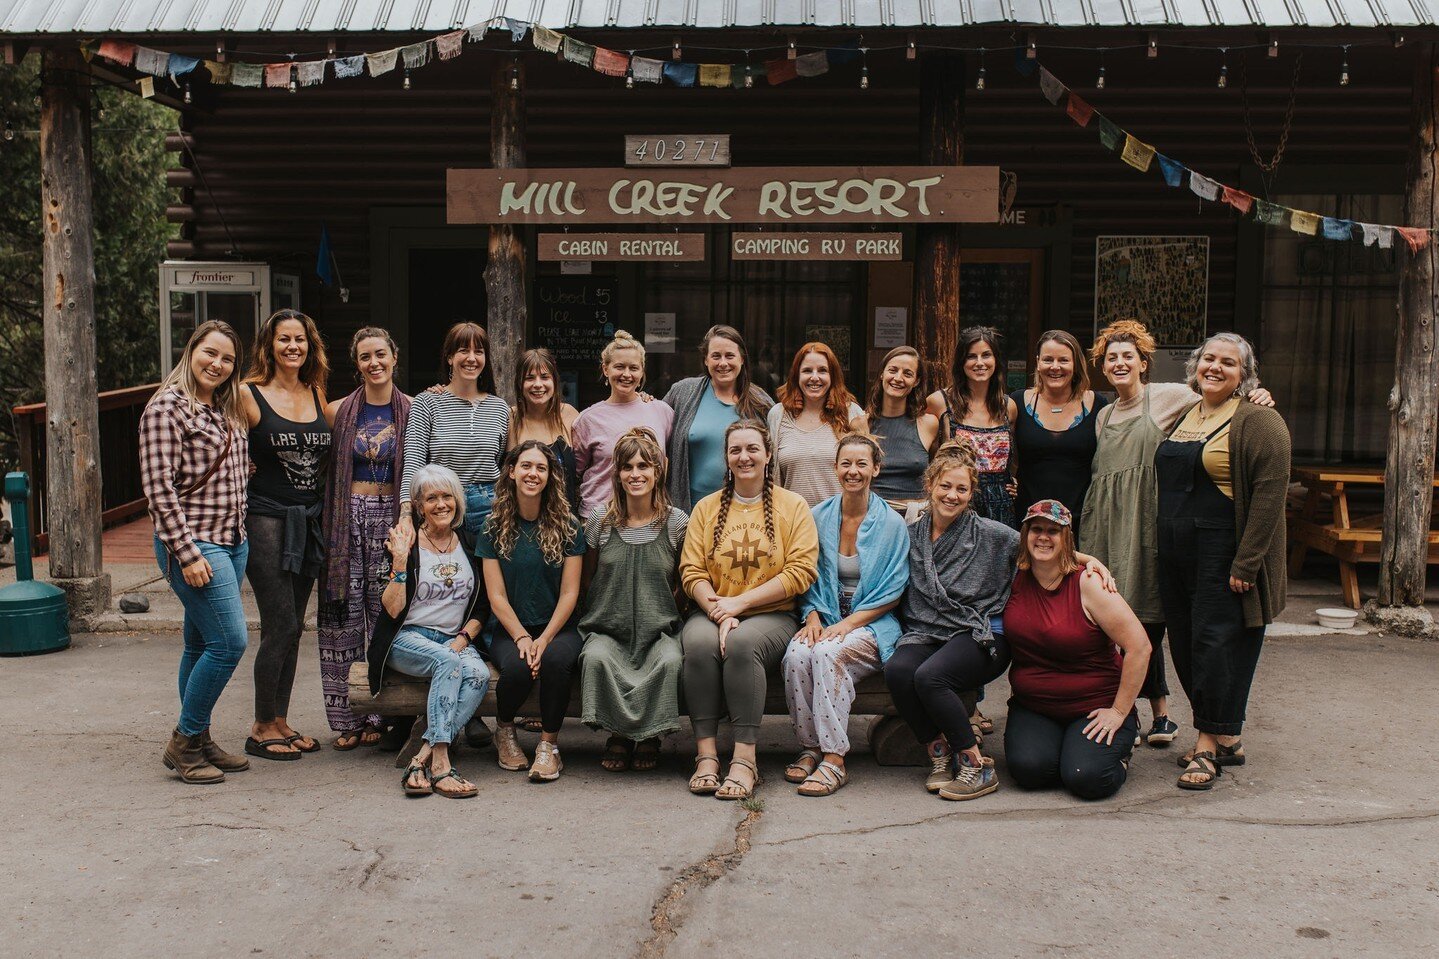 This September 7-10, the InnerShine Women&rsquo;s Collective will gather once again for our second annual women&rsquo;s wellness retreat at Mill Creek Resort. 

We invite you to join us for an unplugged, undistracted weekend to practice radical self-